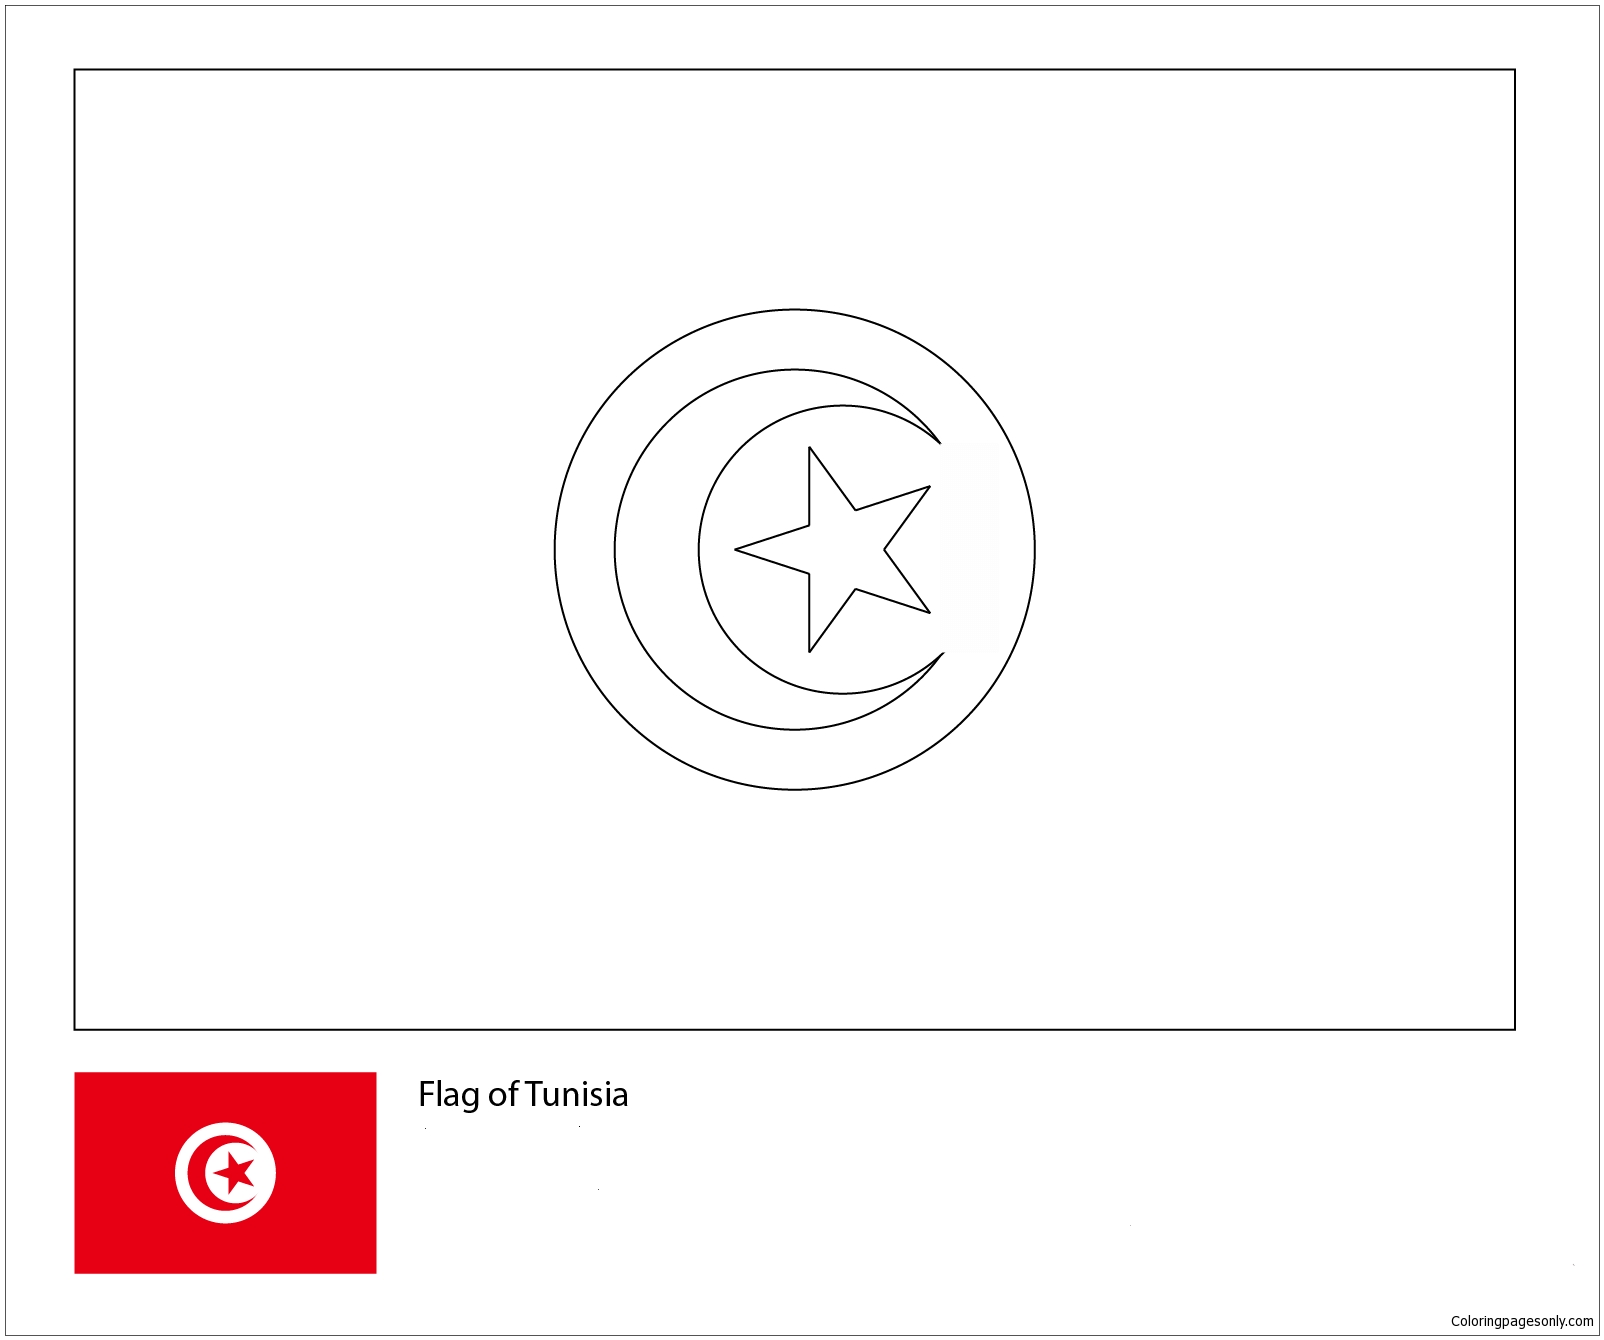 Download Flag of Tunisia-World Cup 2018 Coloring Page - Free Coloring Pages Online